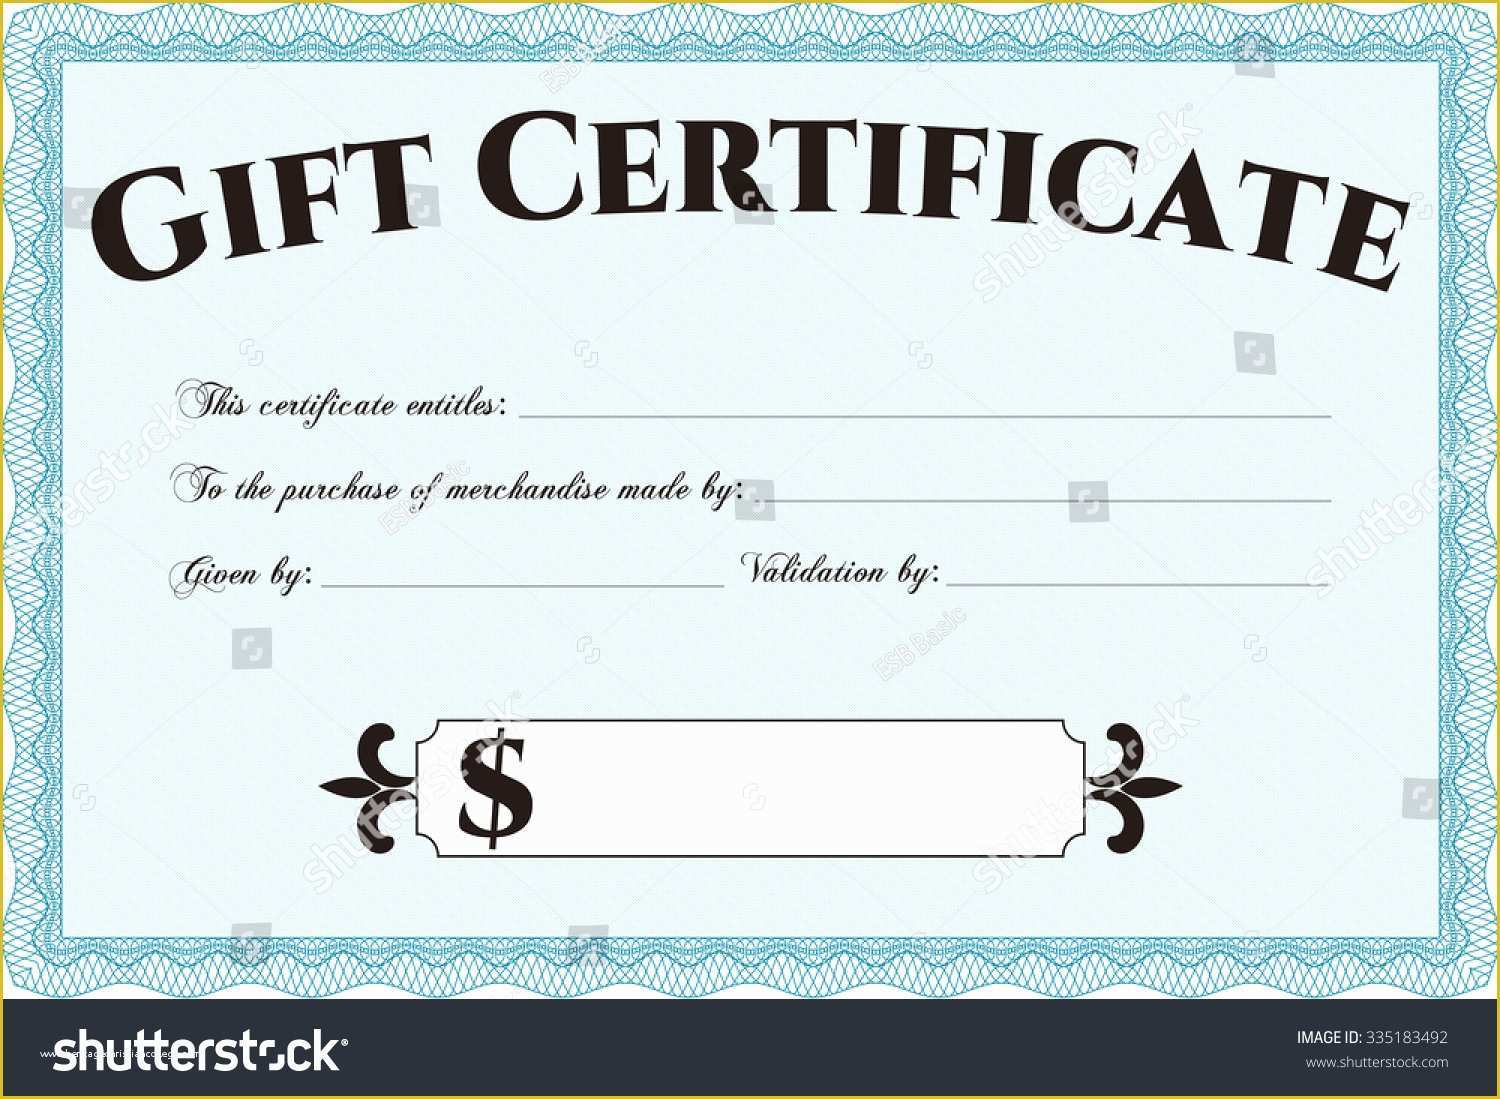 Free Customizable Gift Certificate Template Of Gift Certificate Template Customizable Easy to Edit and